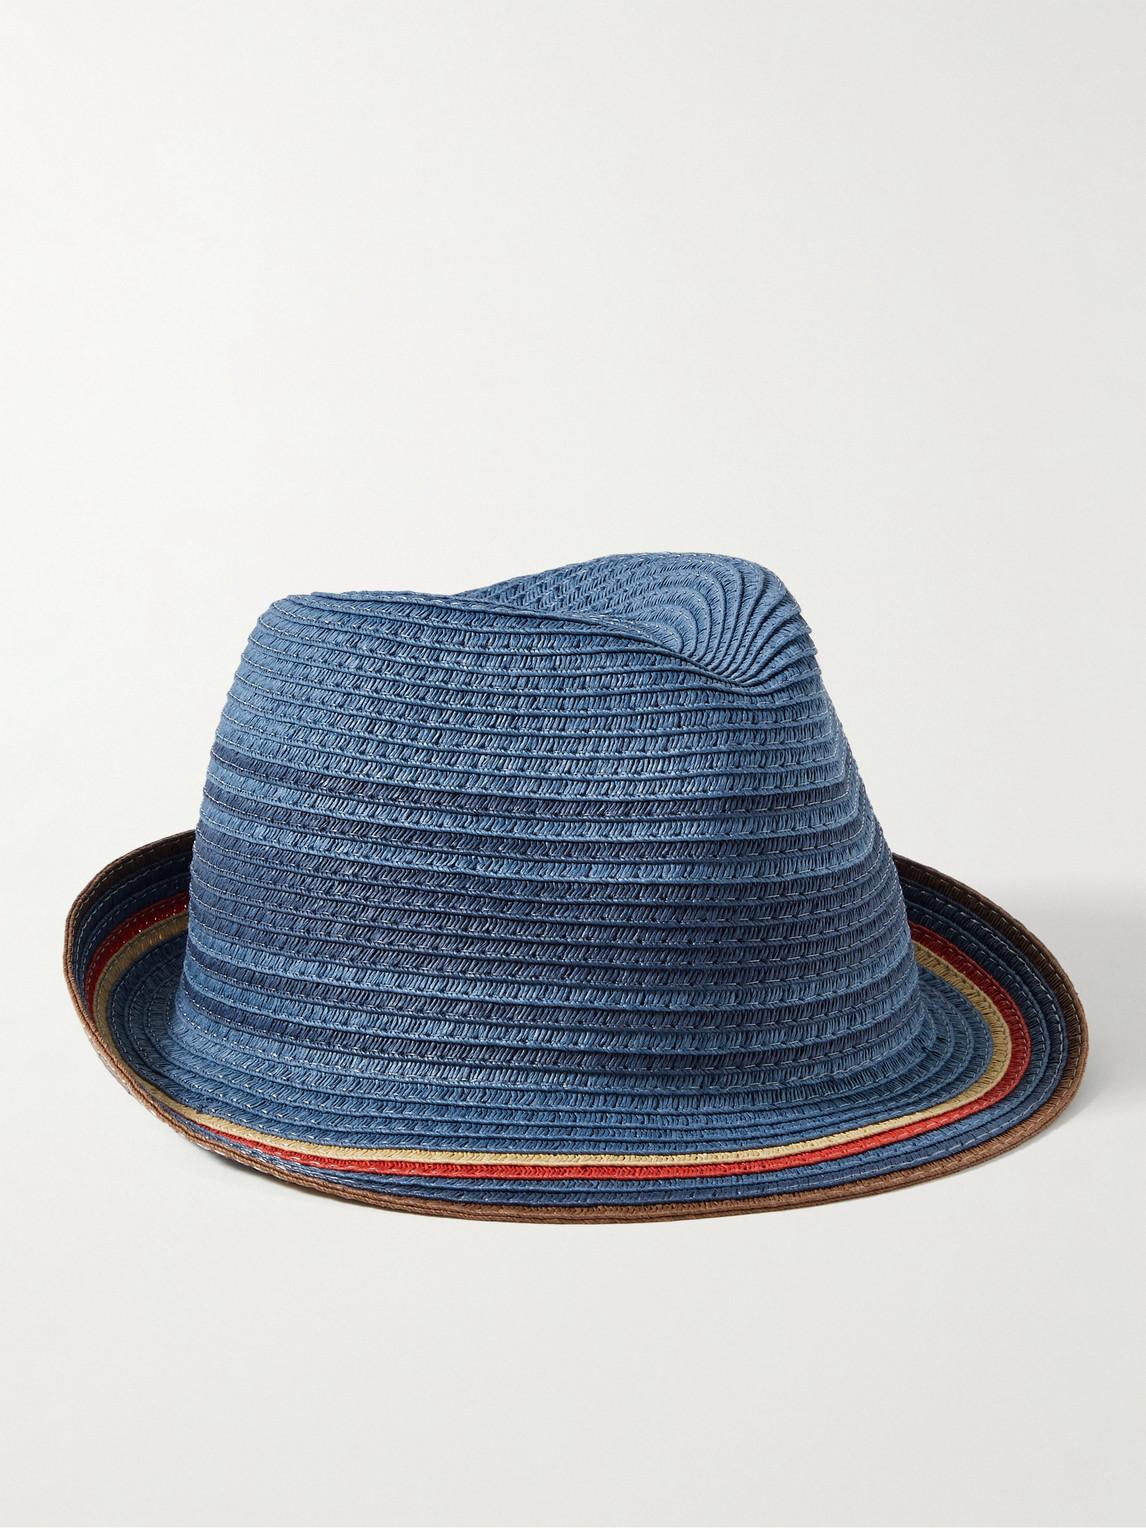 Paul Smith Striped Braided Straw Trilby Hat in Blue for Men | Lyst UK